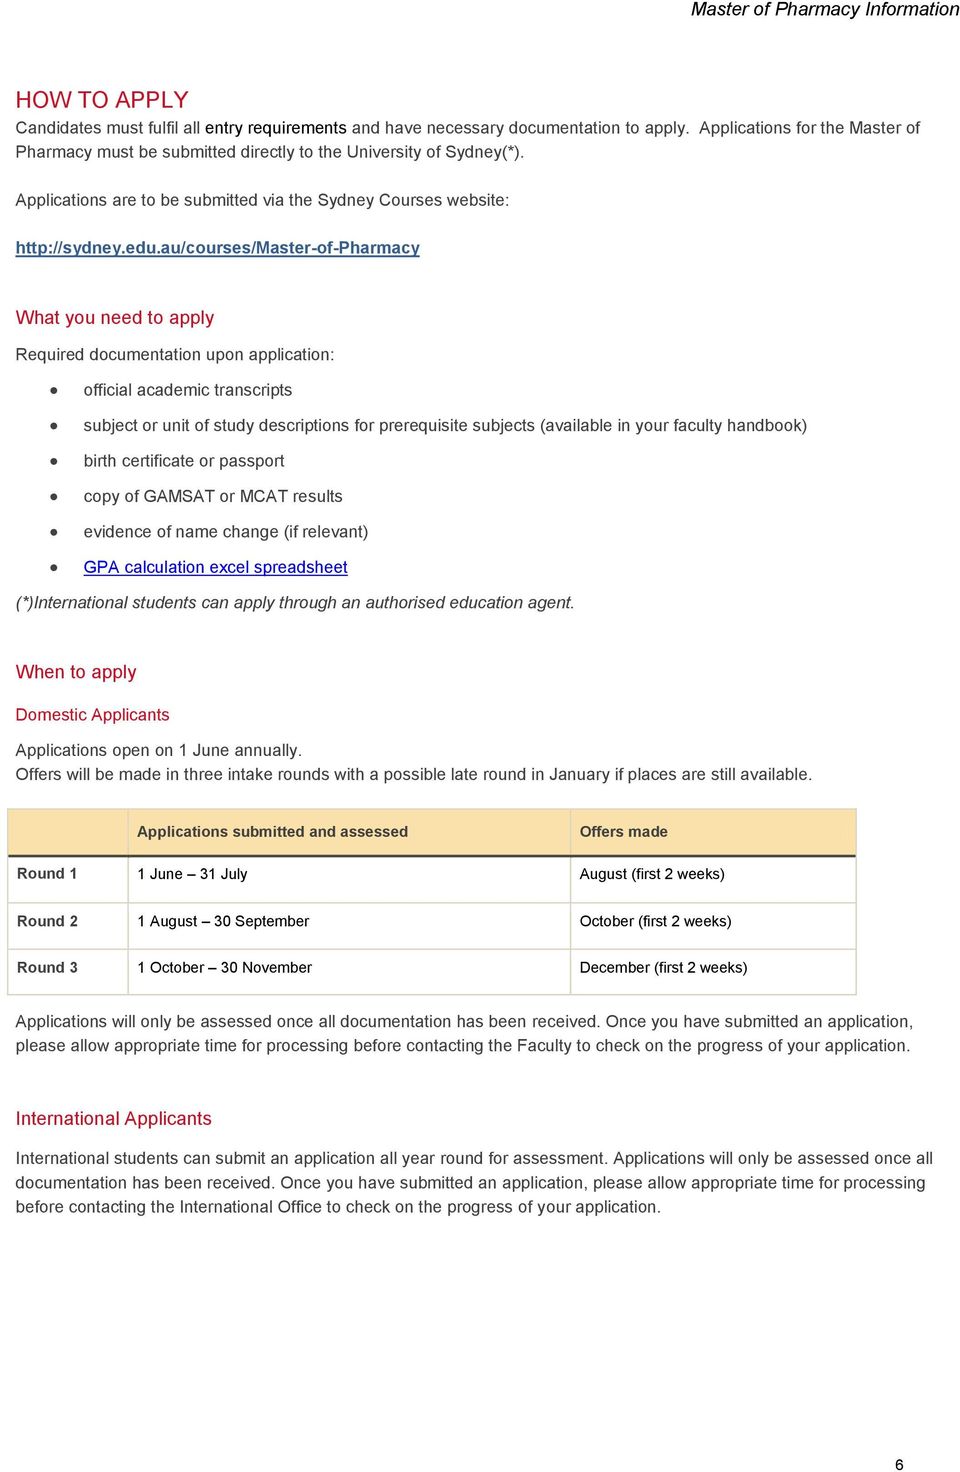 au/courses/master-of-pharmacy What you need to apply Required documentation upon application: official academic transcripts subject or unit of study descriptions for prerequisite subjects (available